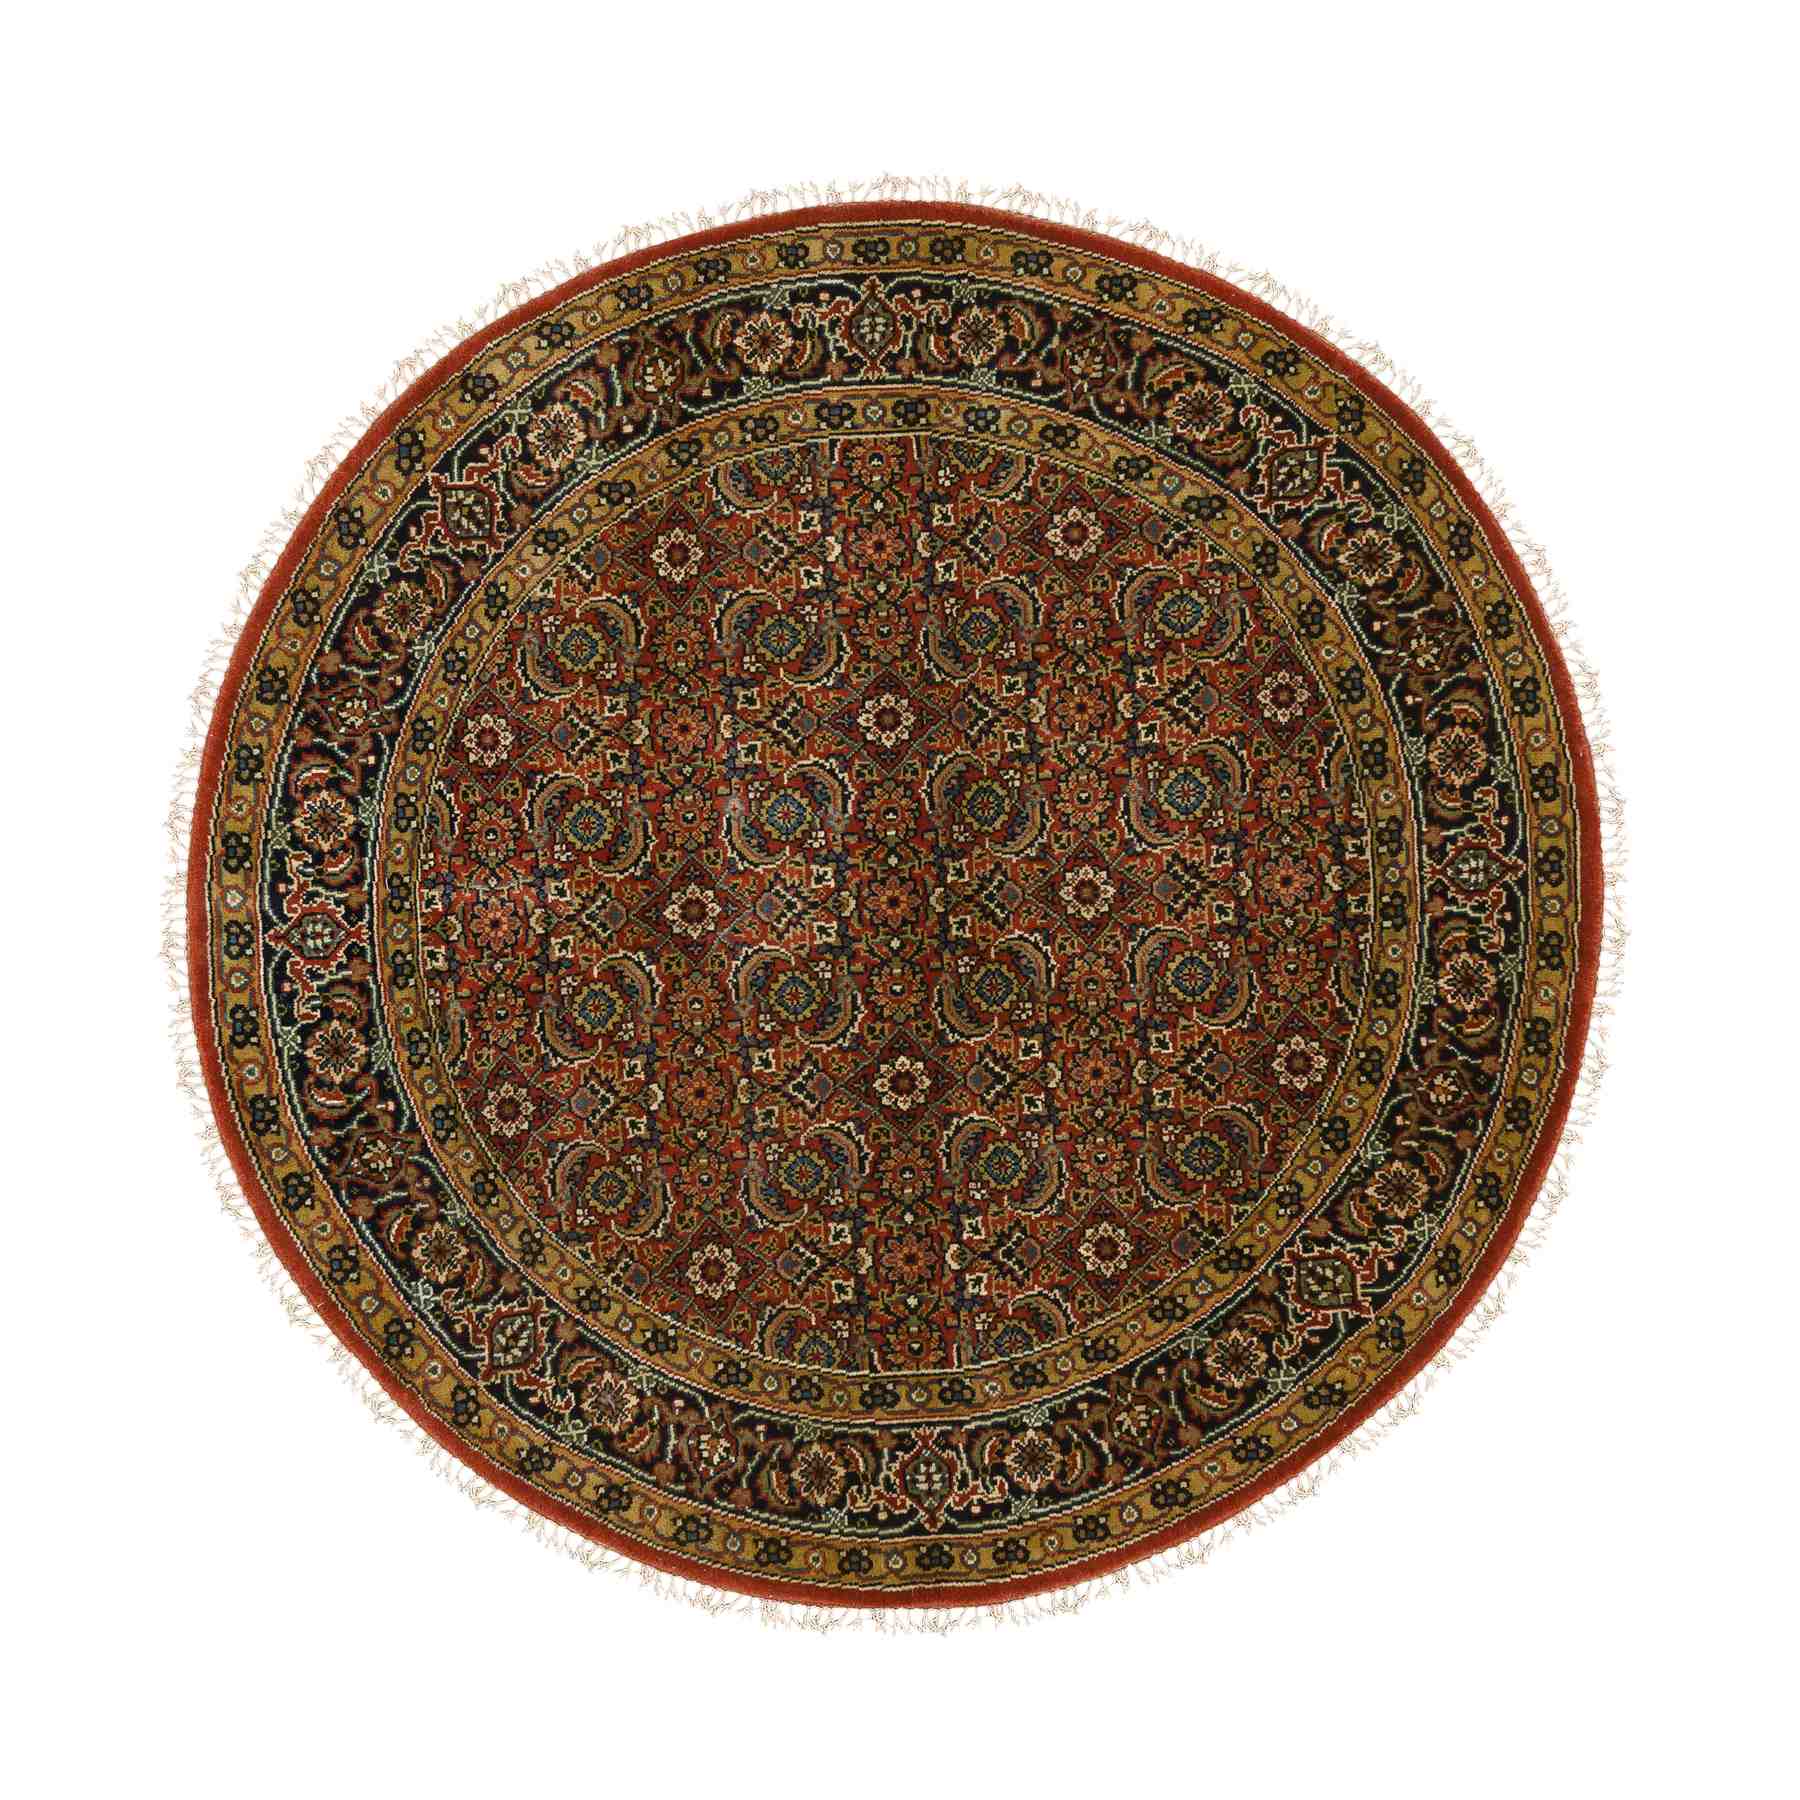 Fine-Oriental-Hand-Knotted-Rug-317660